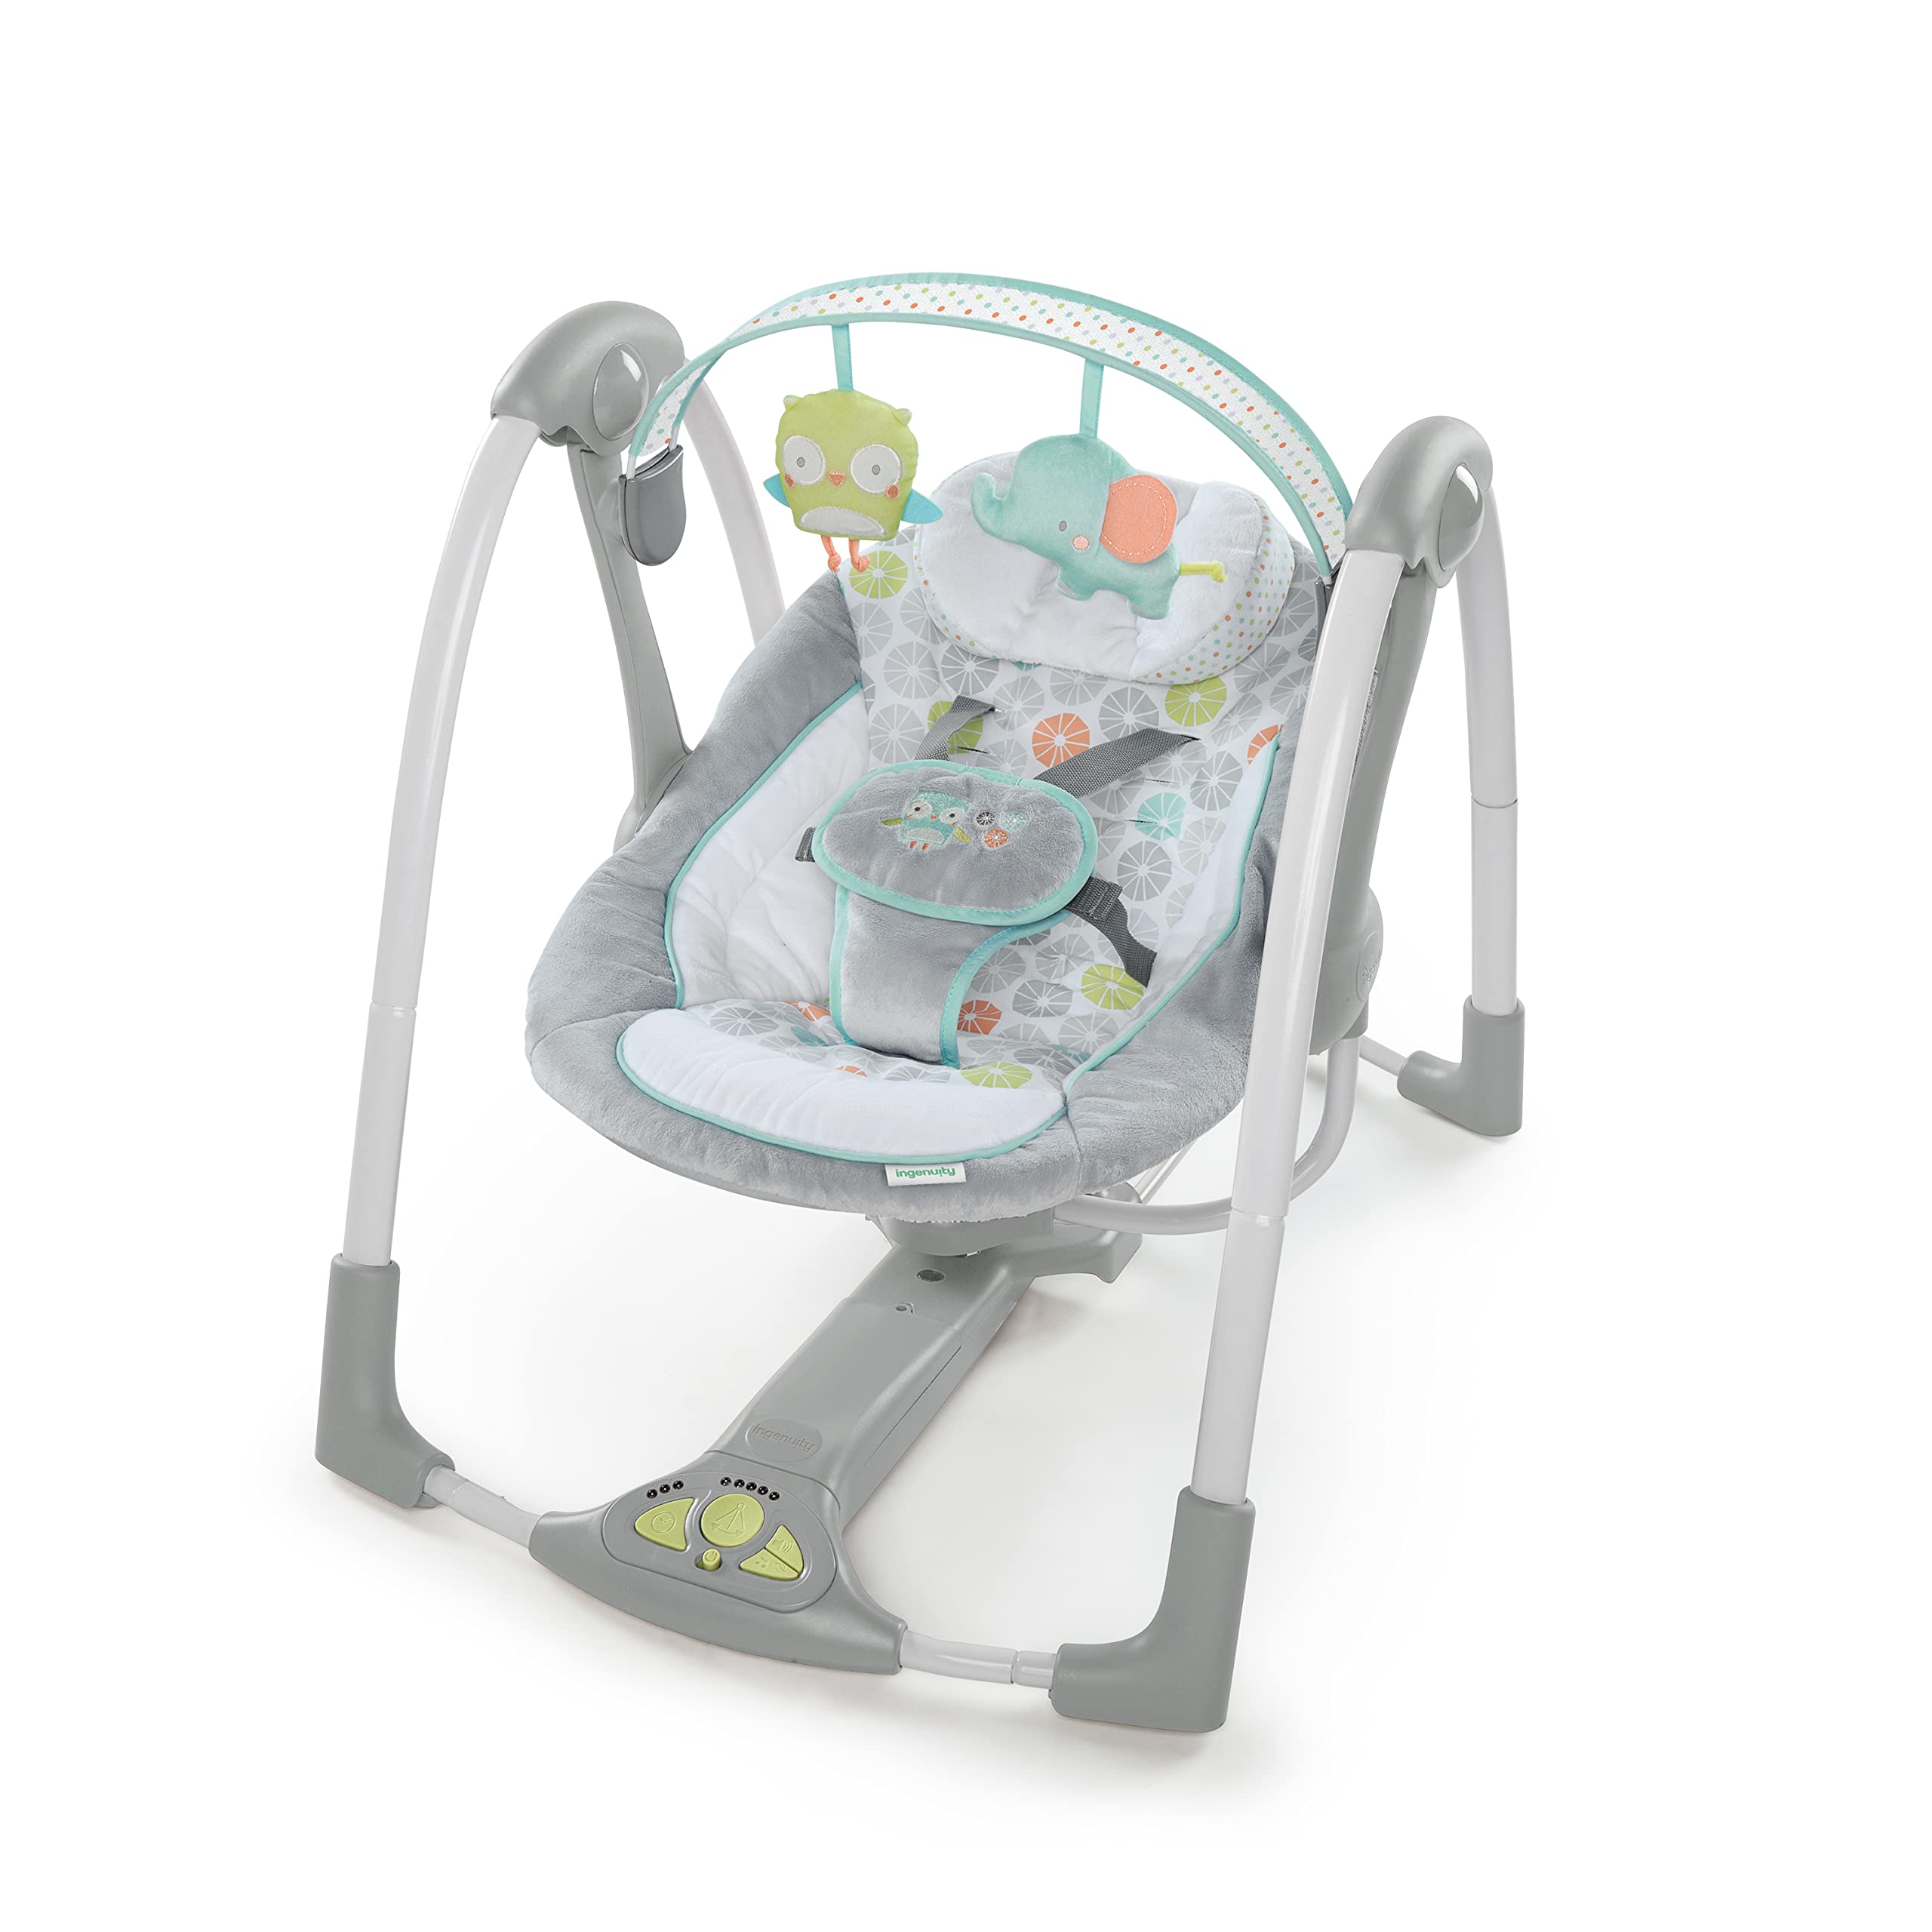 Ingenuity 5-Speed Portable Baby Swing With Music, Nature Sounds & Battery-Saving Technology - Hugs & Hoots, Swing N Go, 0-9 Mont